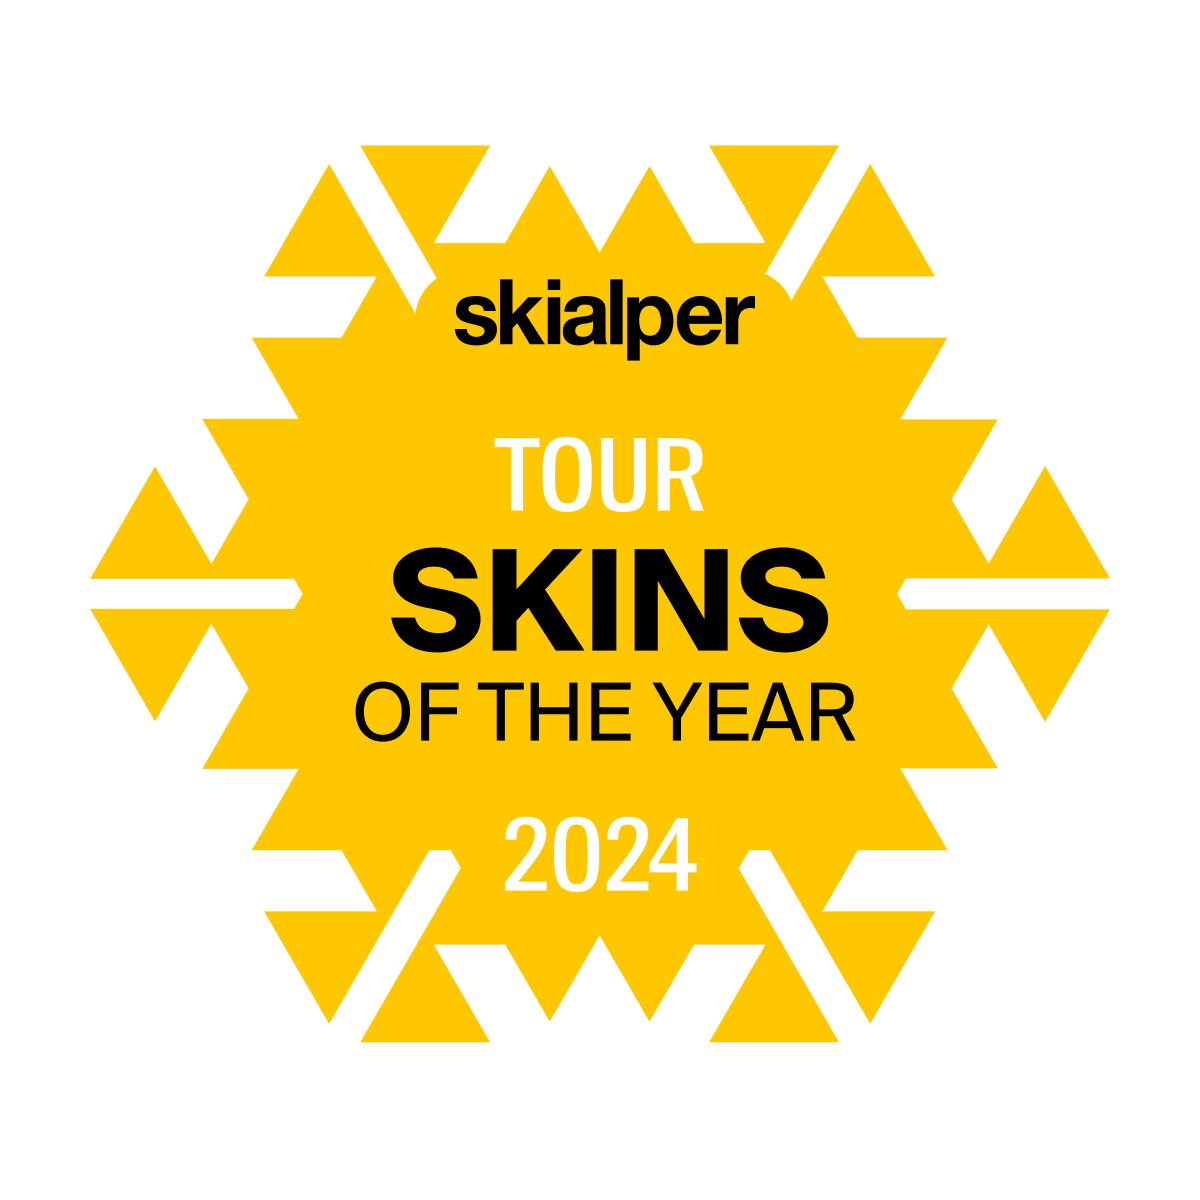 Skins of the year tour